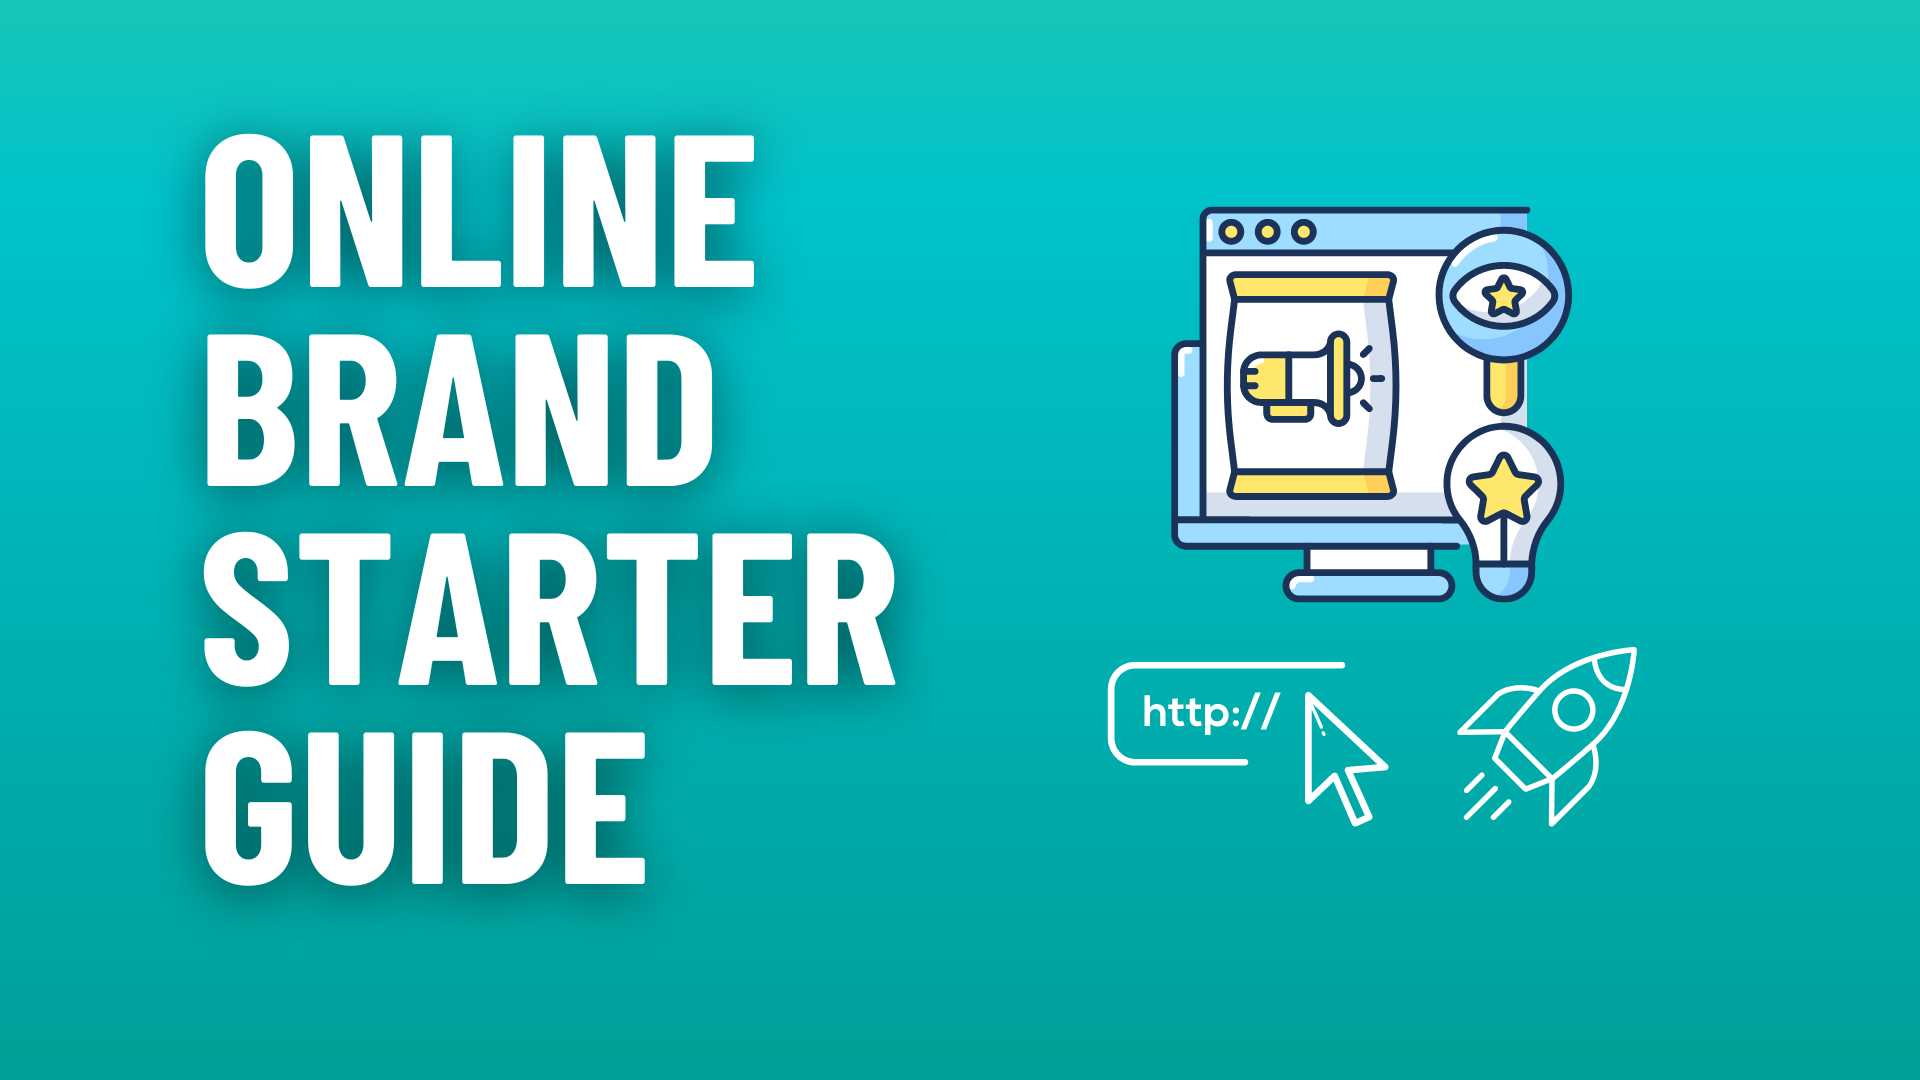 online brand starter guide course image